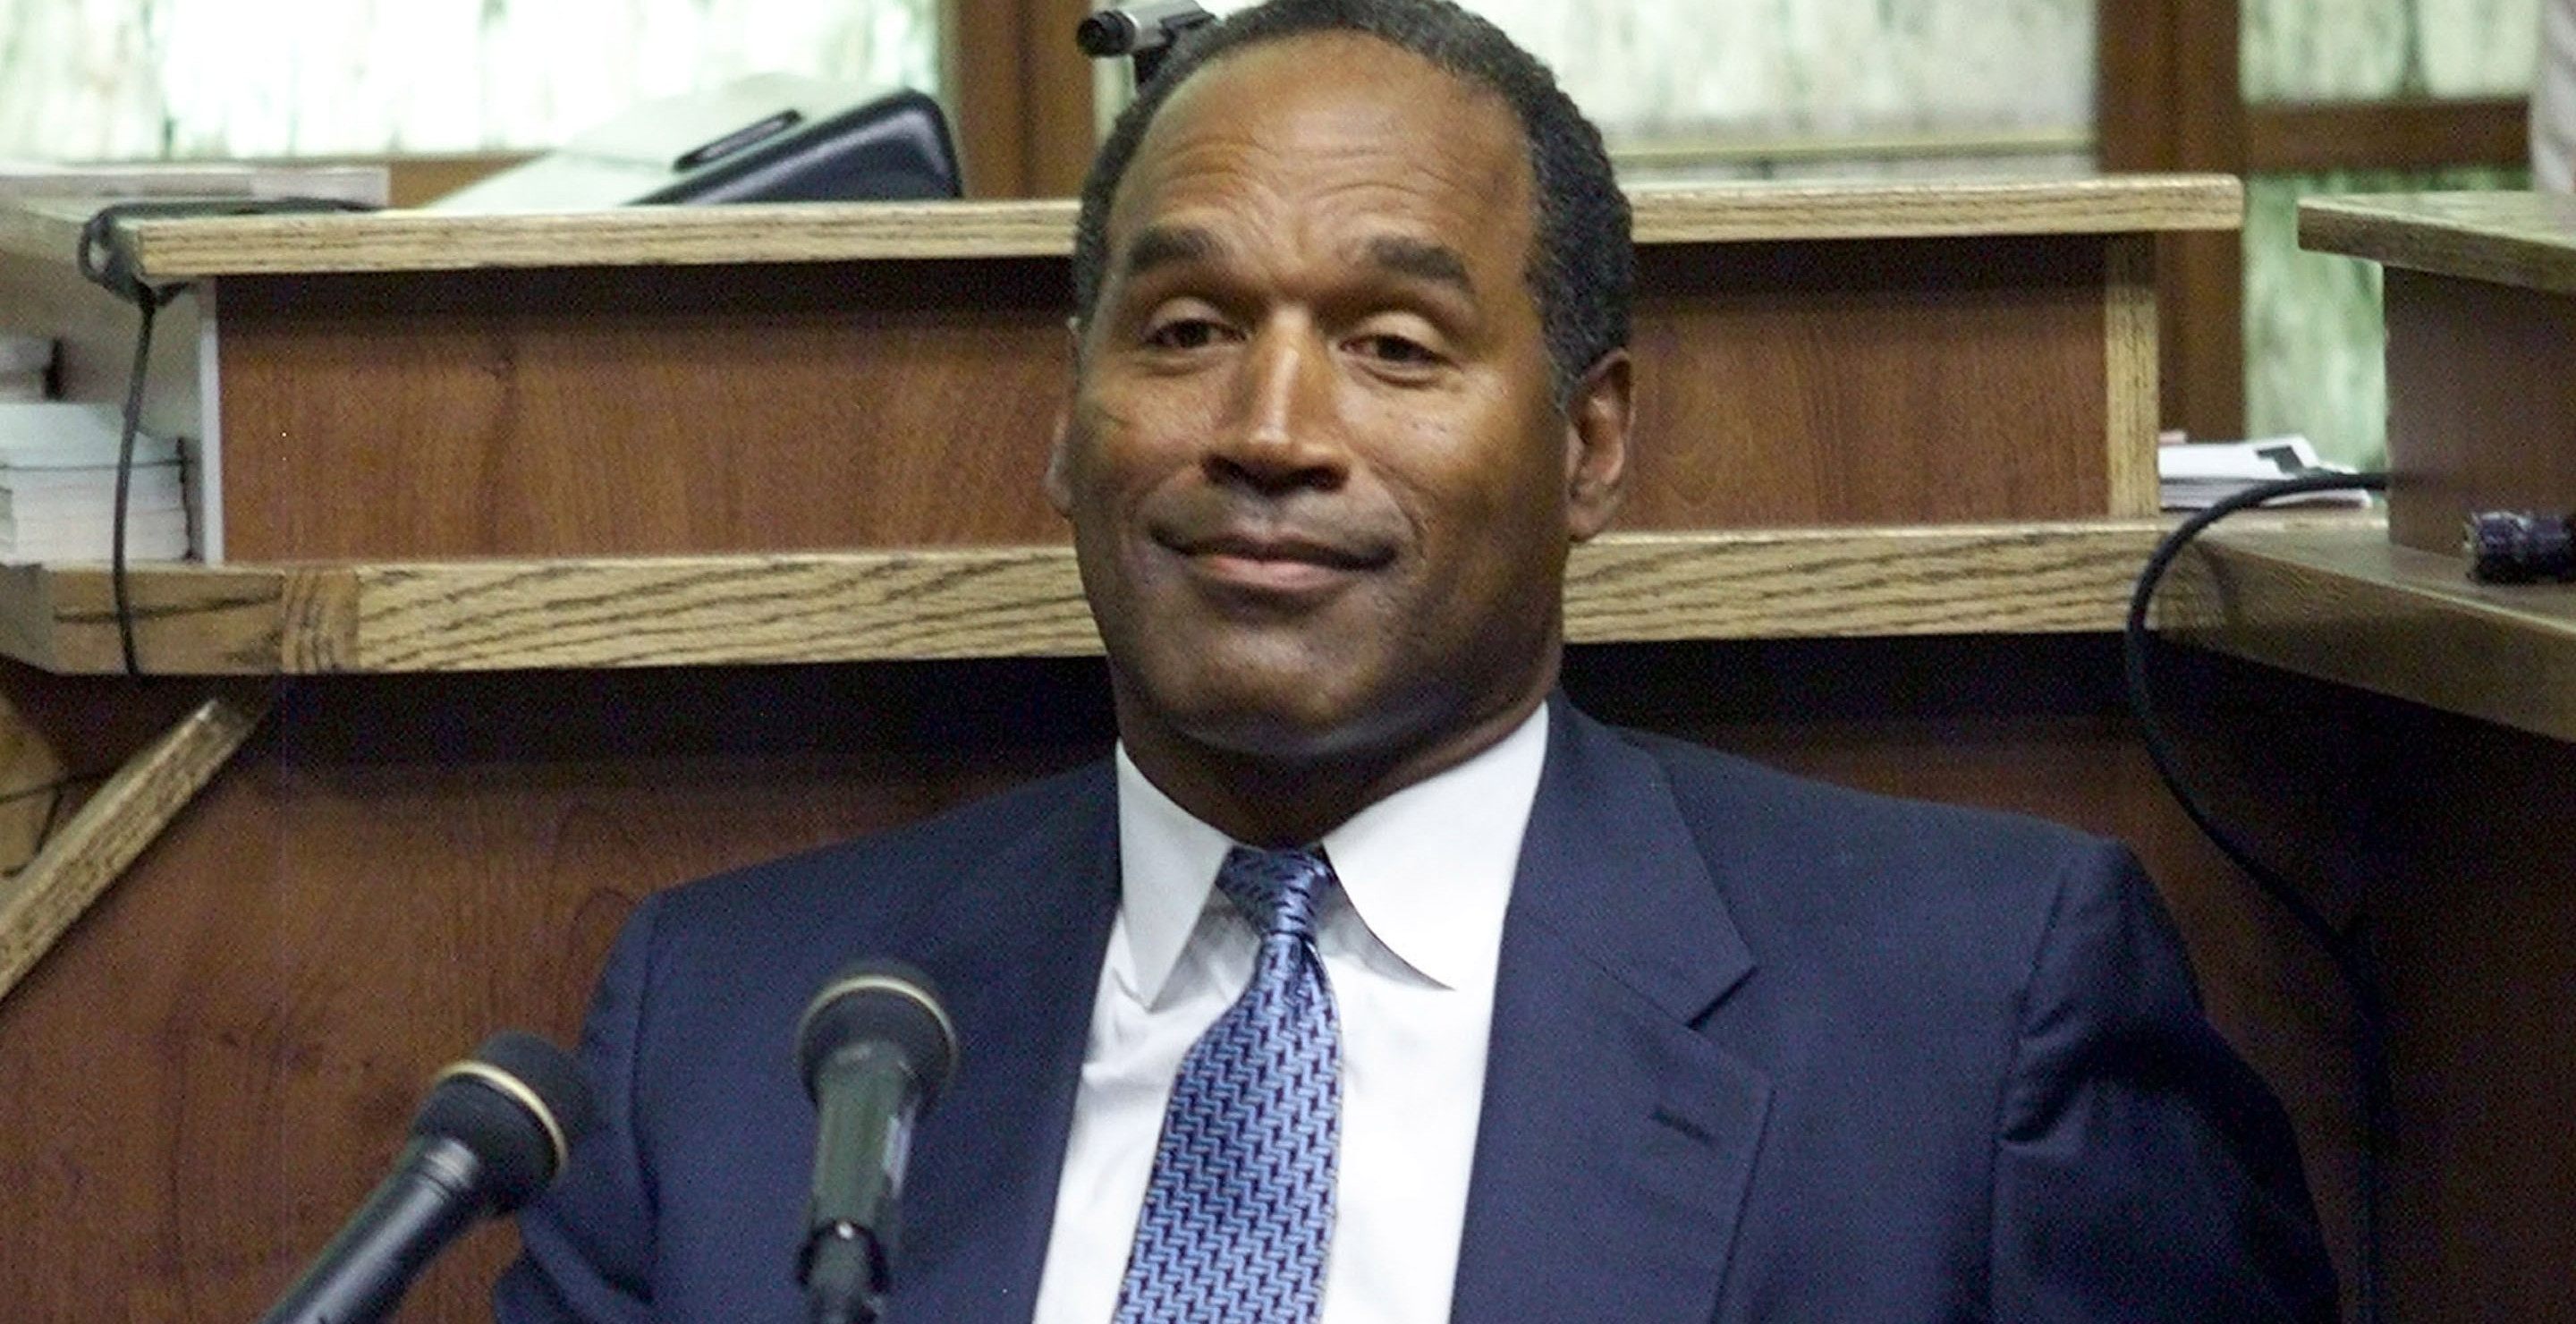 BET Awards Draws Backlash For Honoring OJ Simpson Of All People